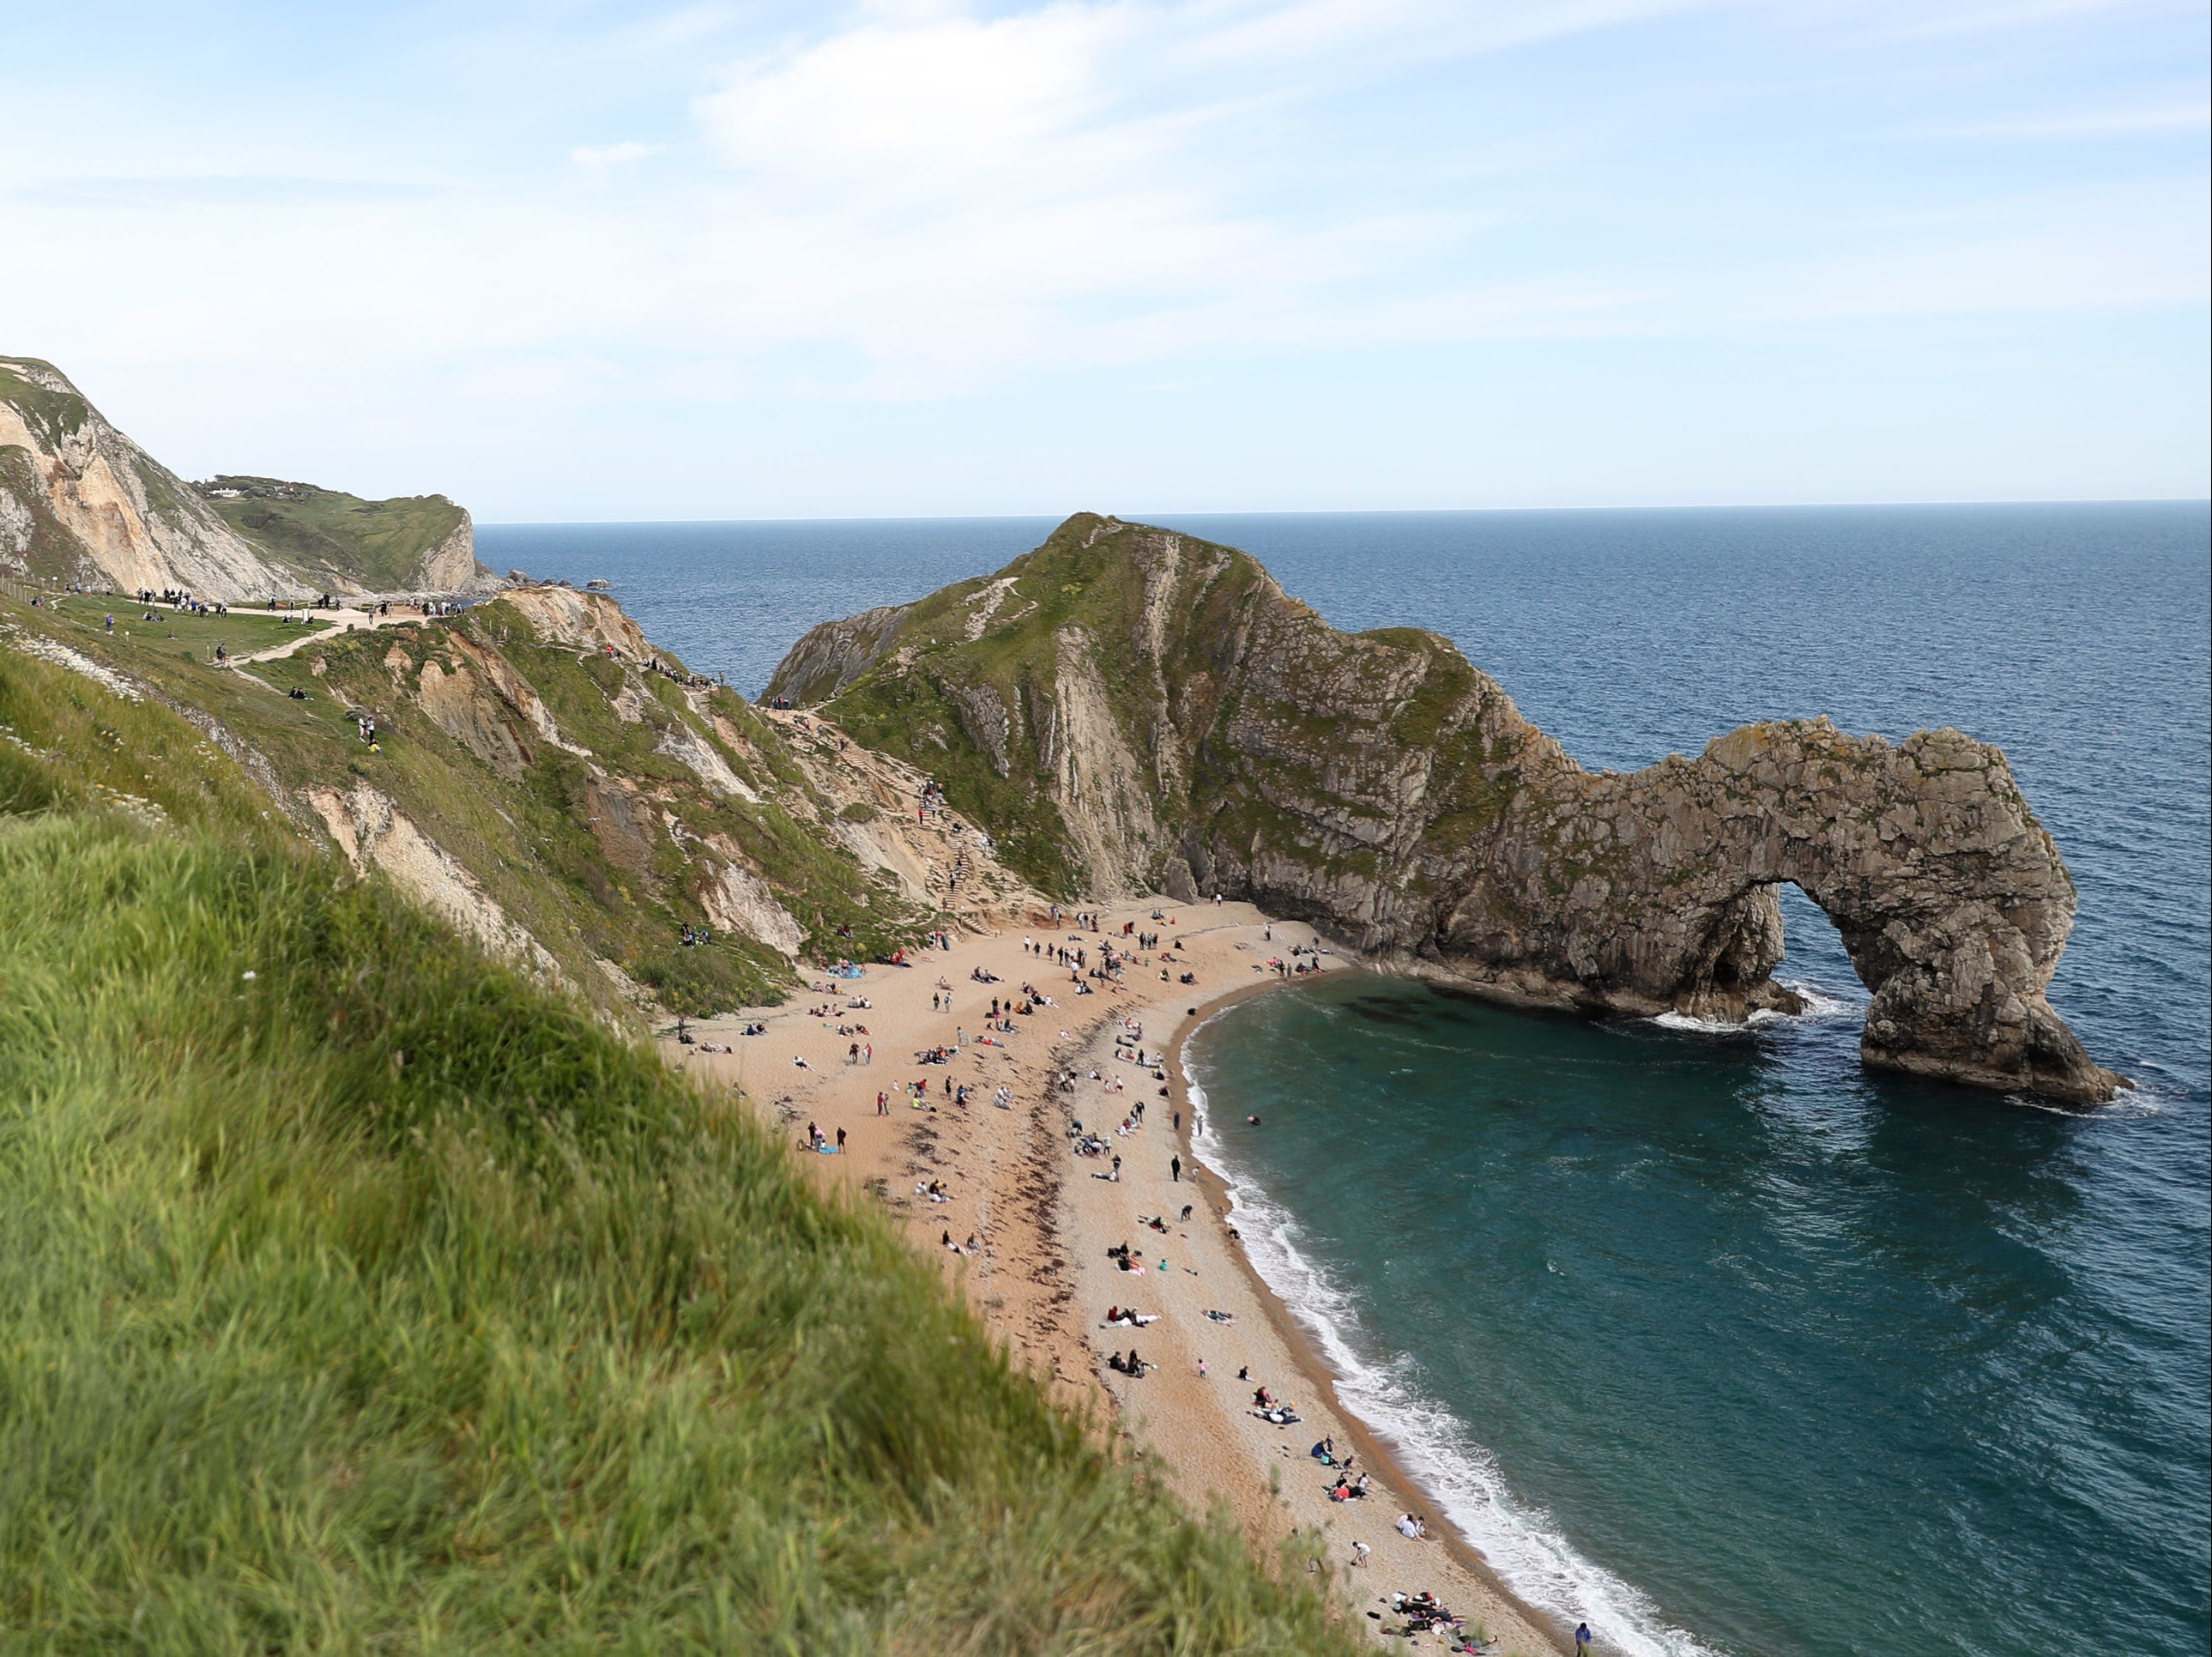 Durdle Door, one of Dorset’s most famous tourist attractions, was the scene of several stunts last year